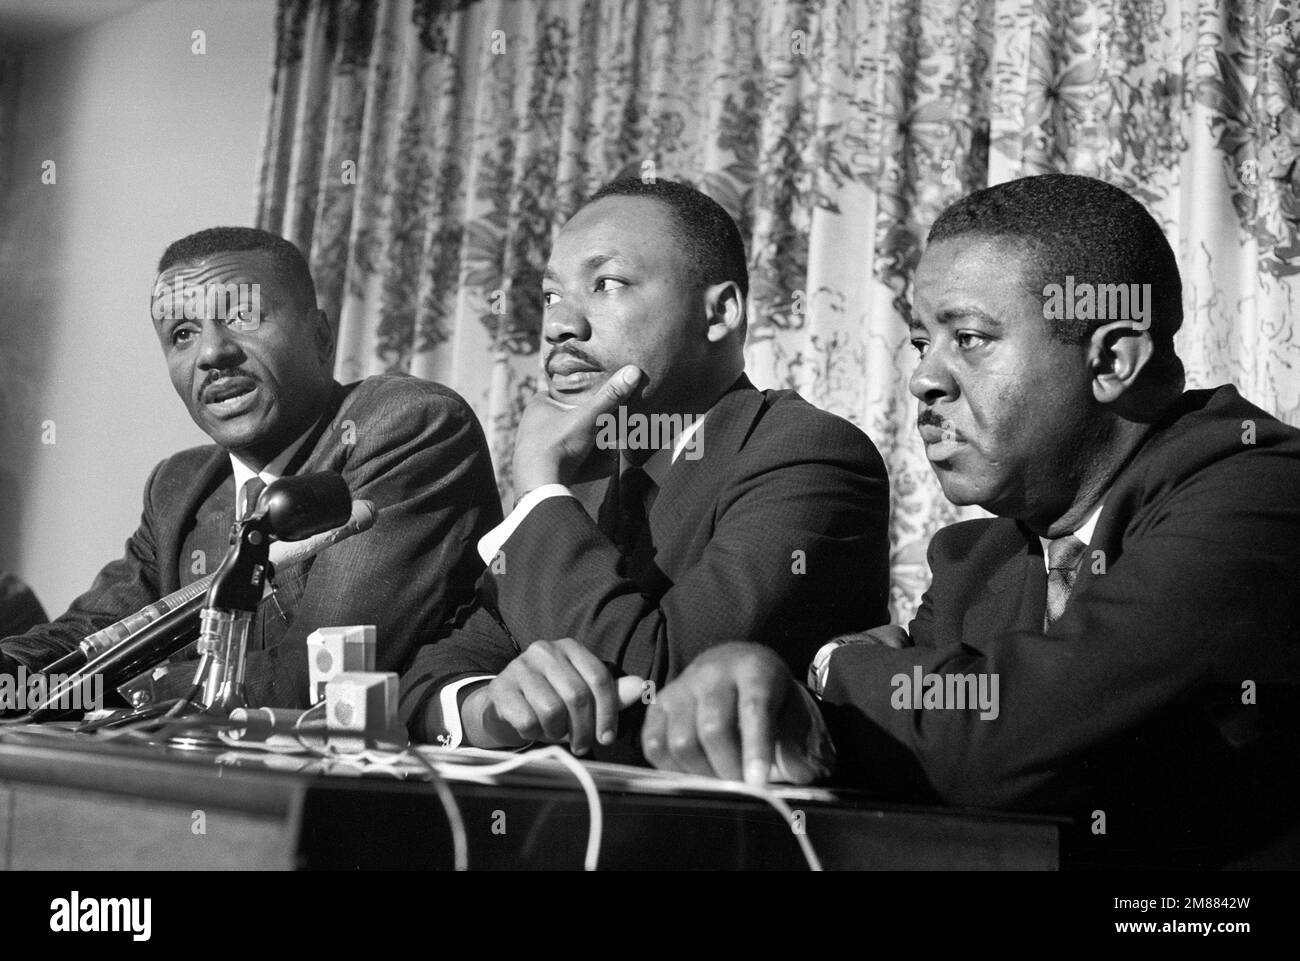 Civil rights leaders (left to right) Fred Shuttlesworth, Martin Luther King and Ralph Abernathy at press conference during Birmingham Campaign, Birmingham, Alabama, USA, Marion S. Trikosko, US News & World Report Magazine Collection, May 16, 1963 Stock Photo